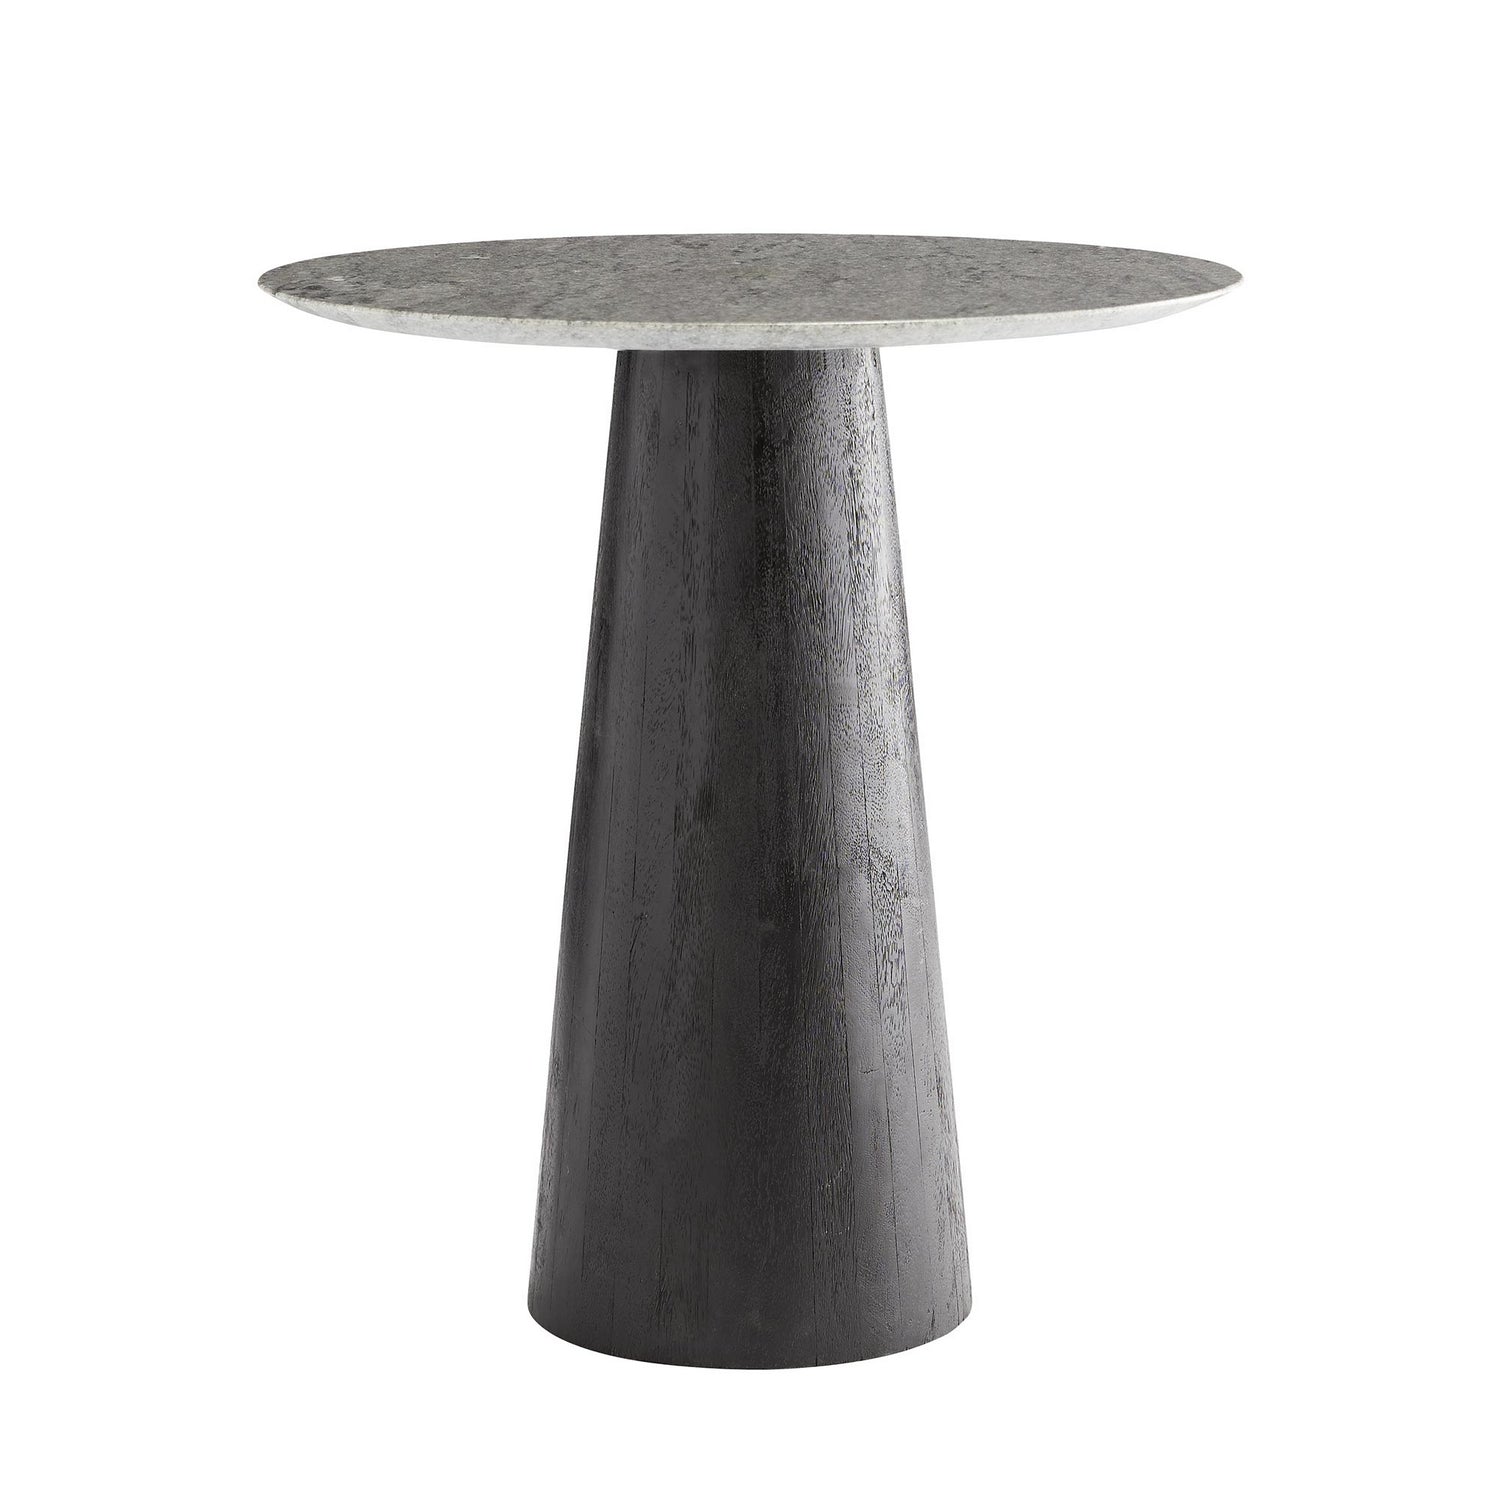 Side Table from the Theodore collection in Sandlasted Ebony finish